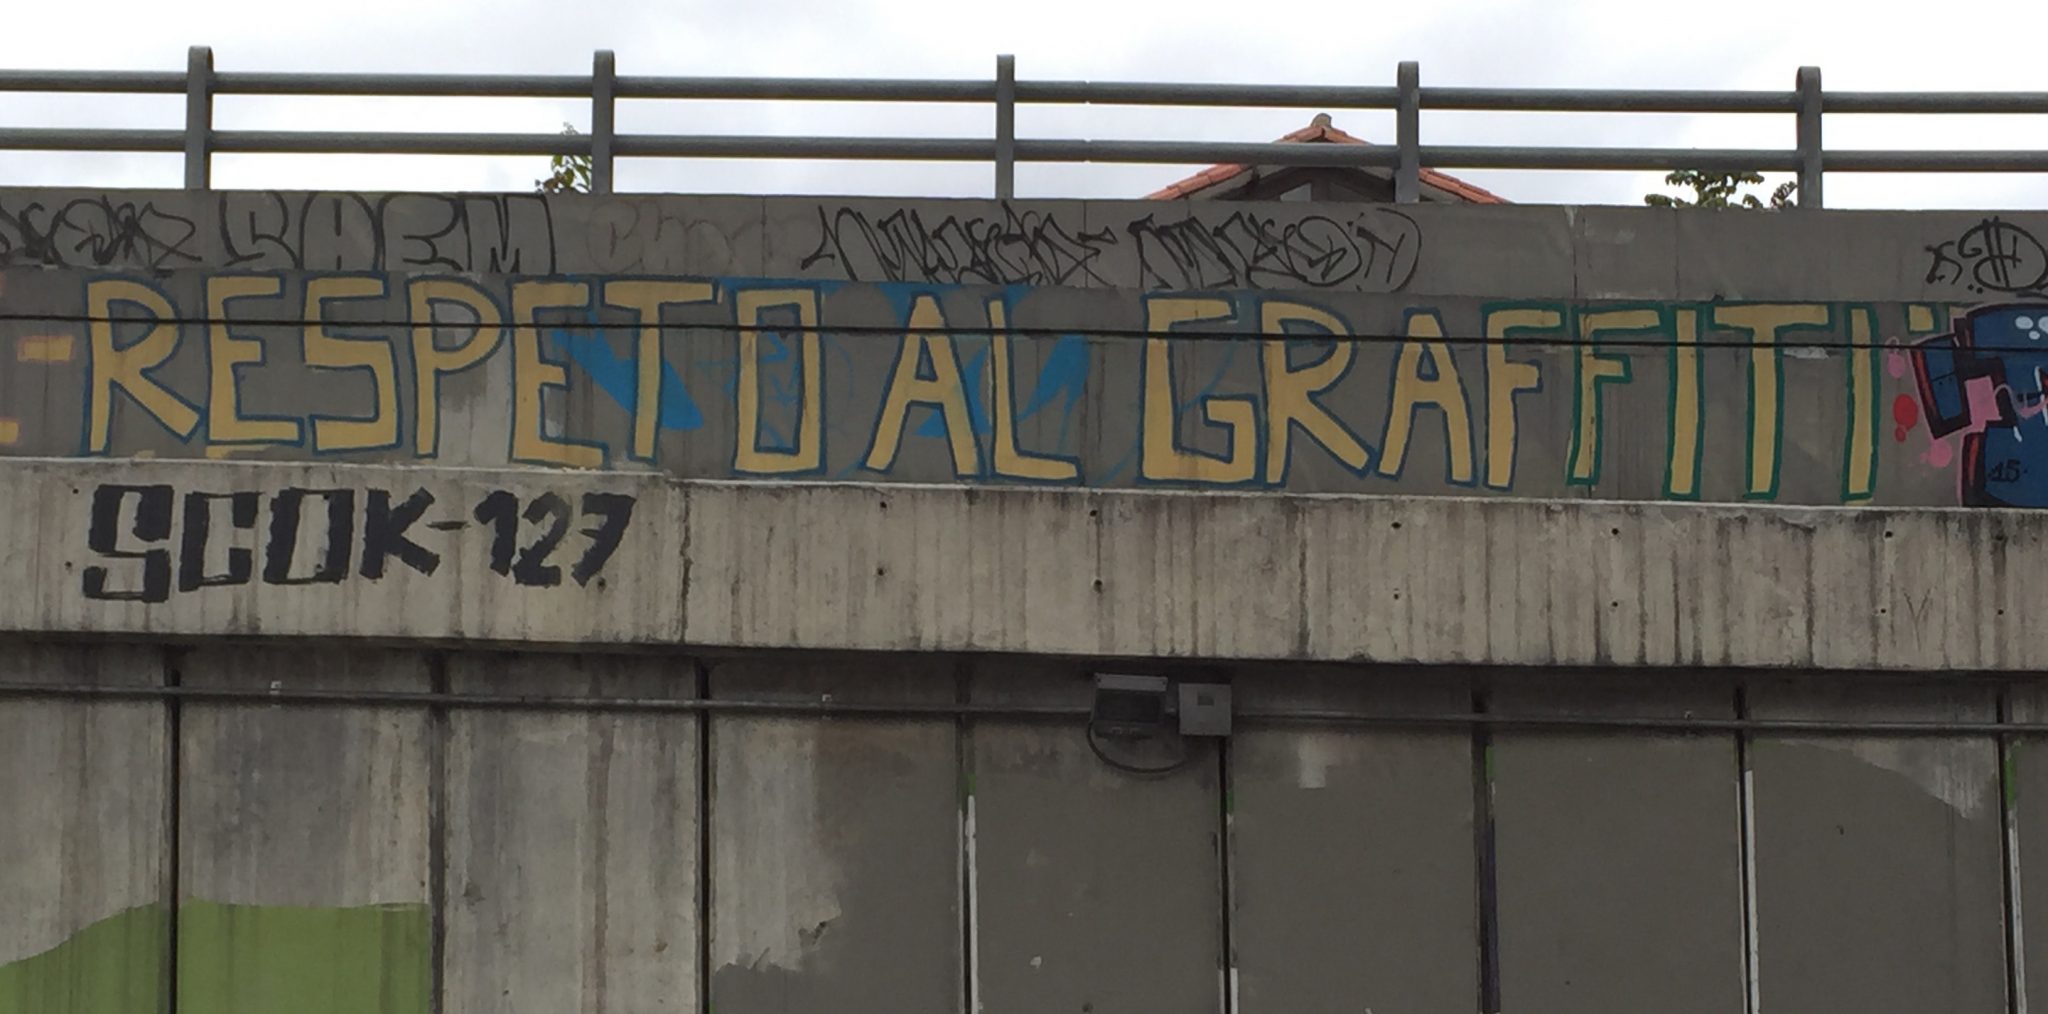 The frightening impact of graffiti on our local communities - See Brilliance